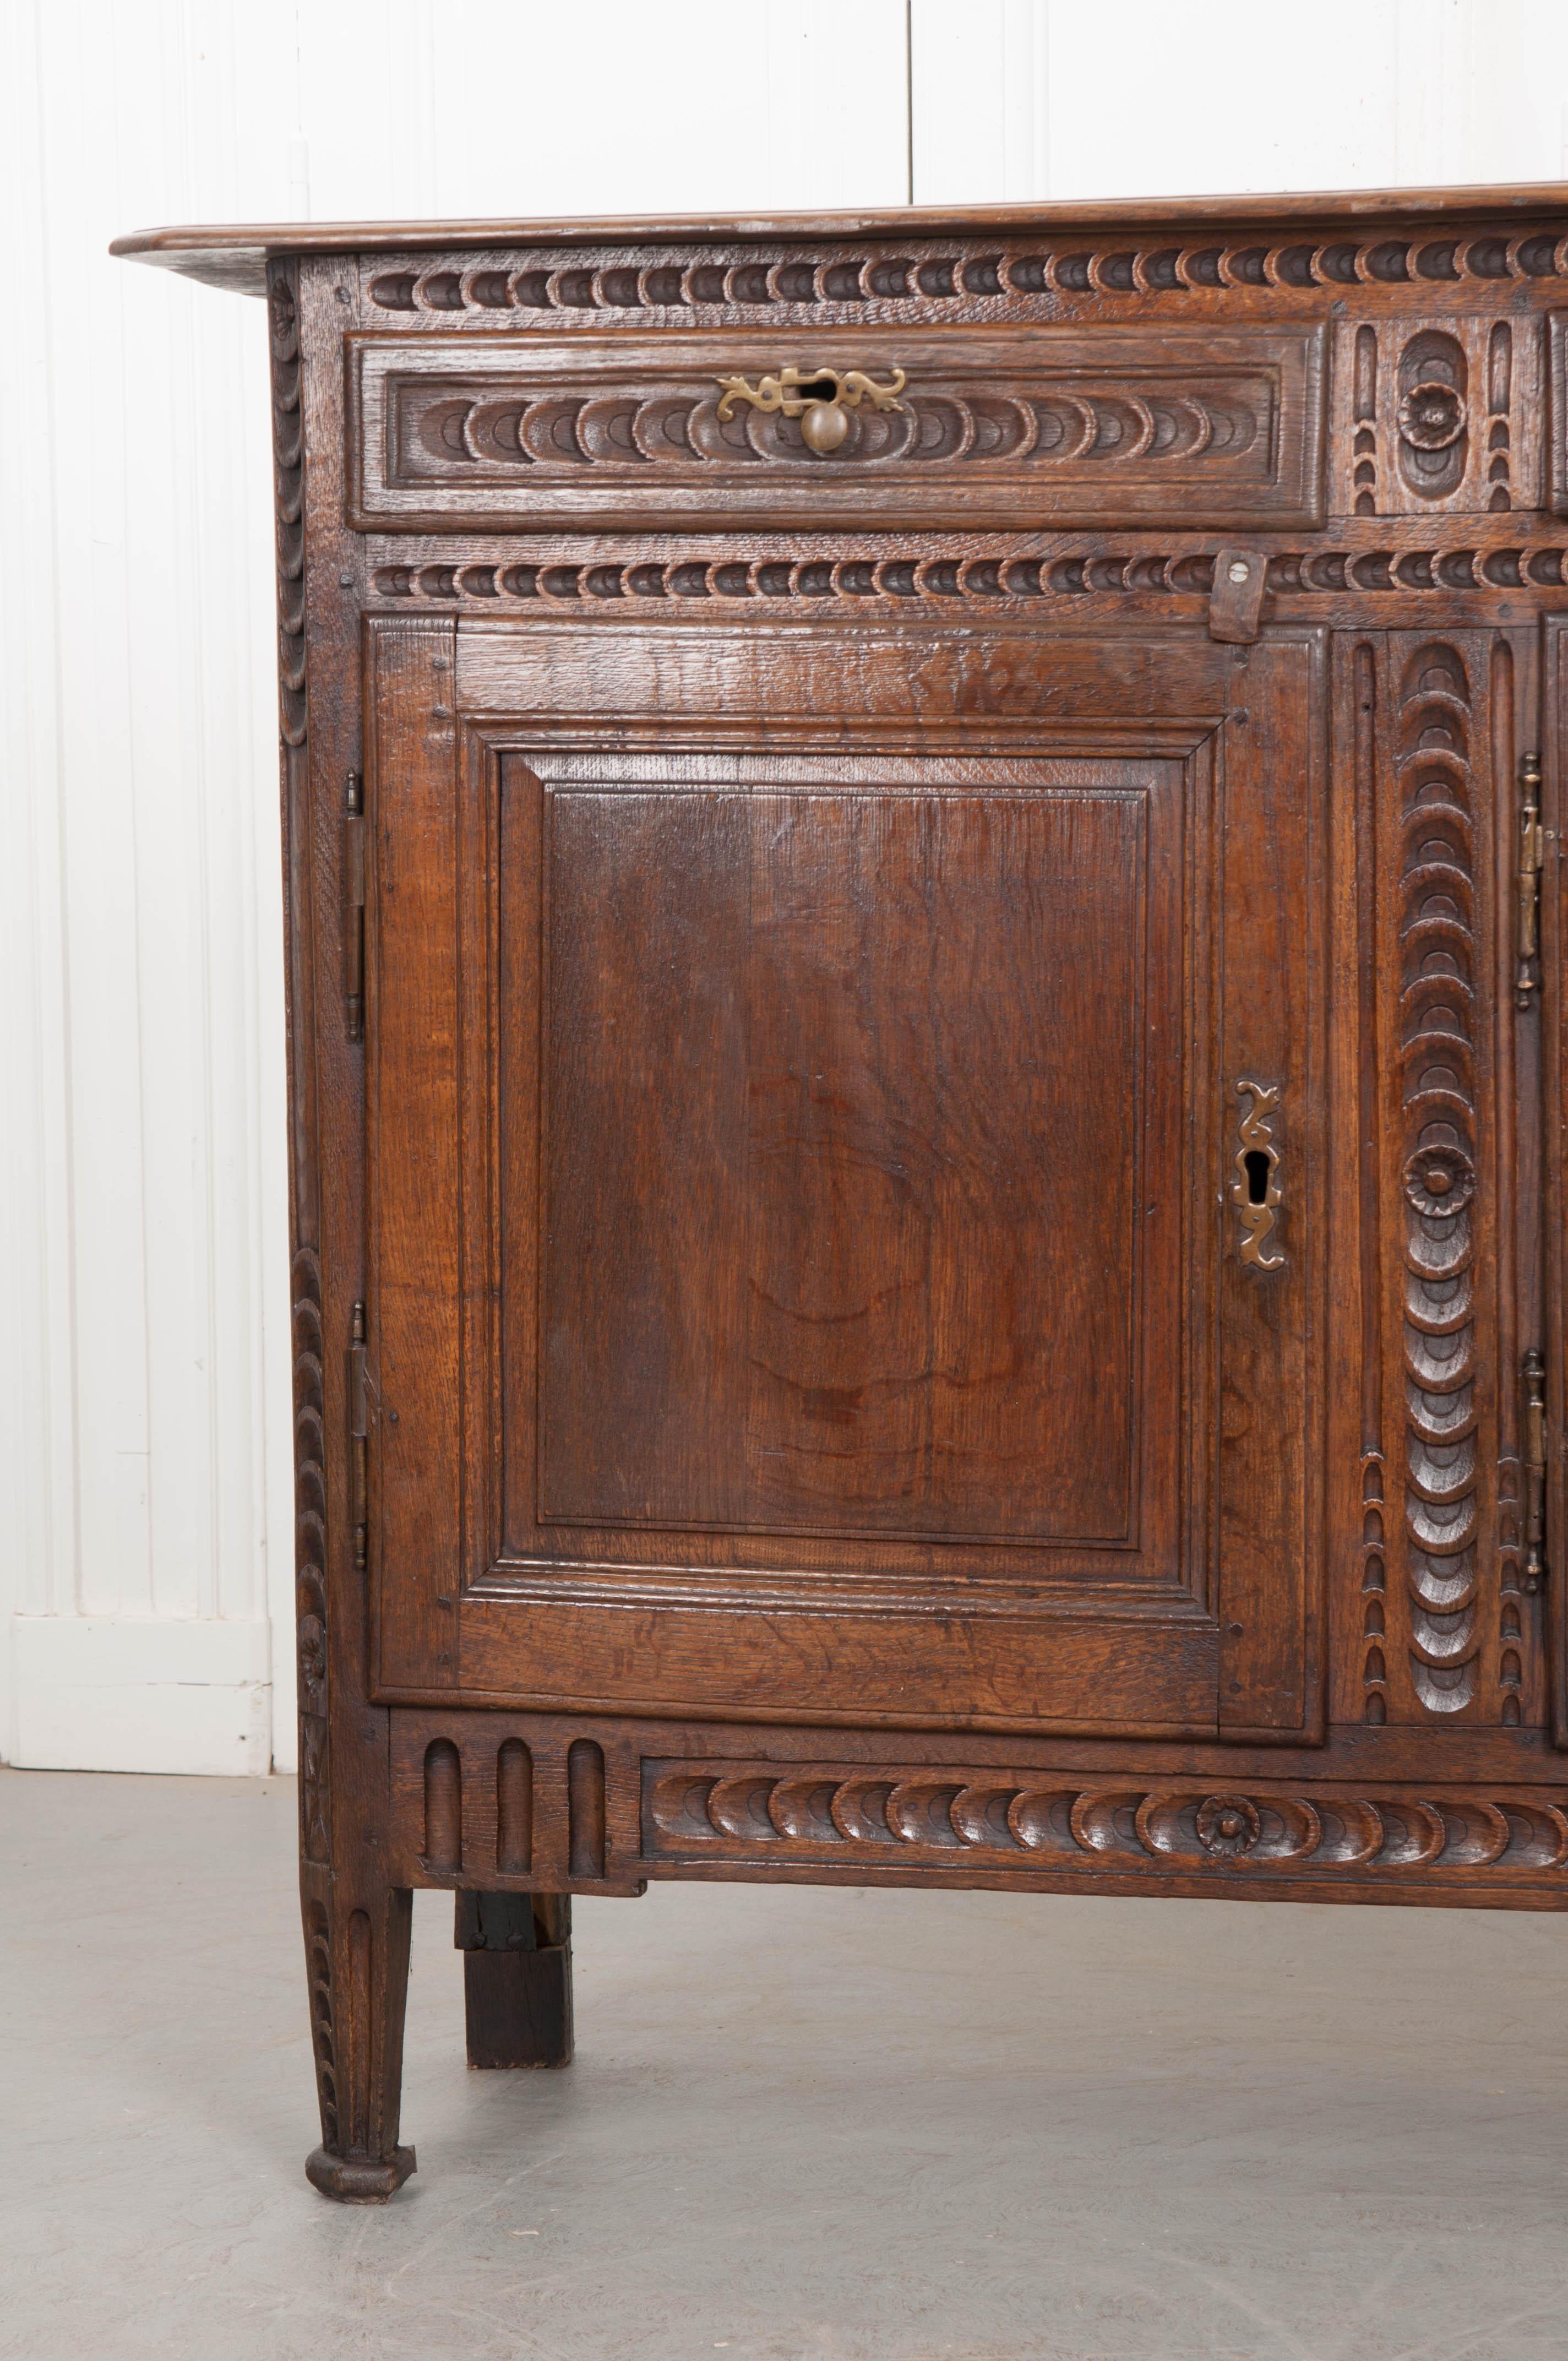 An outstanding hand carved, solid oak enfilade, made in France circa 1860. The large case piece has been meticulously hand carved with a running crescent moon motif found all-over the enfilade. Three drawers provide places for storing silverware or